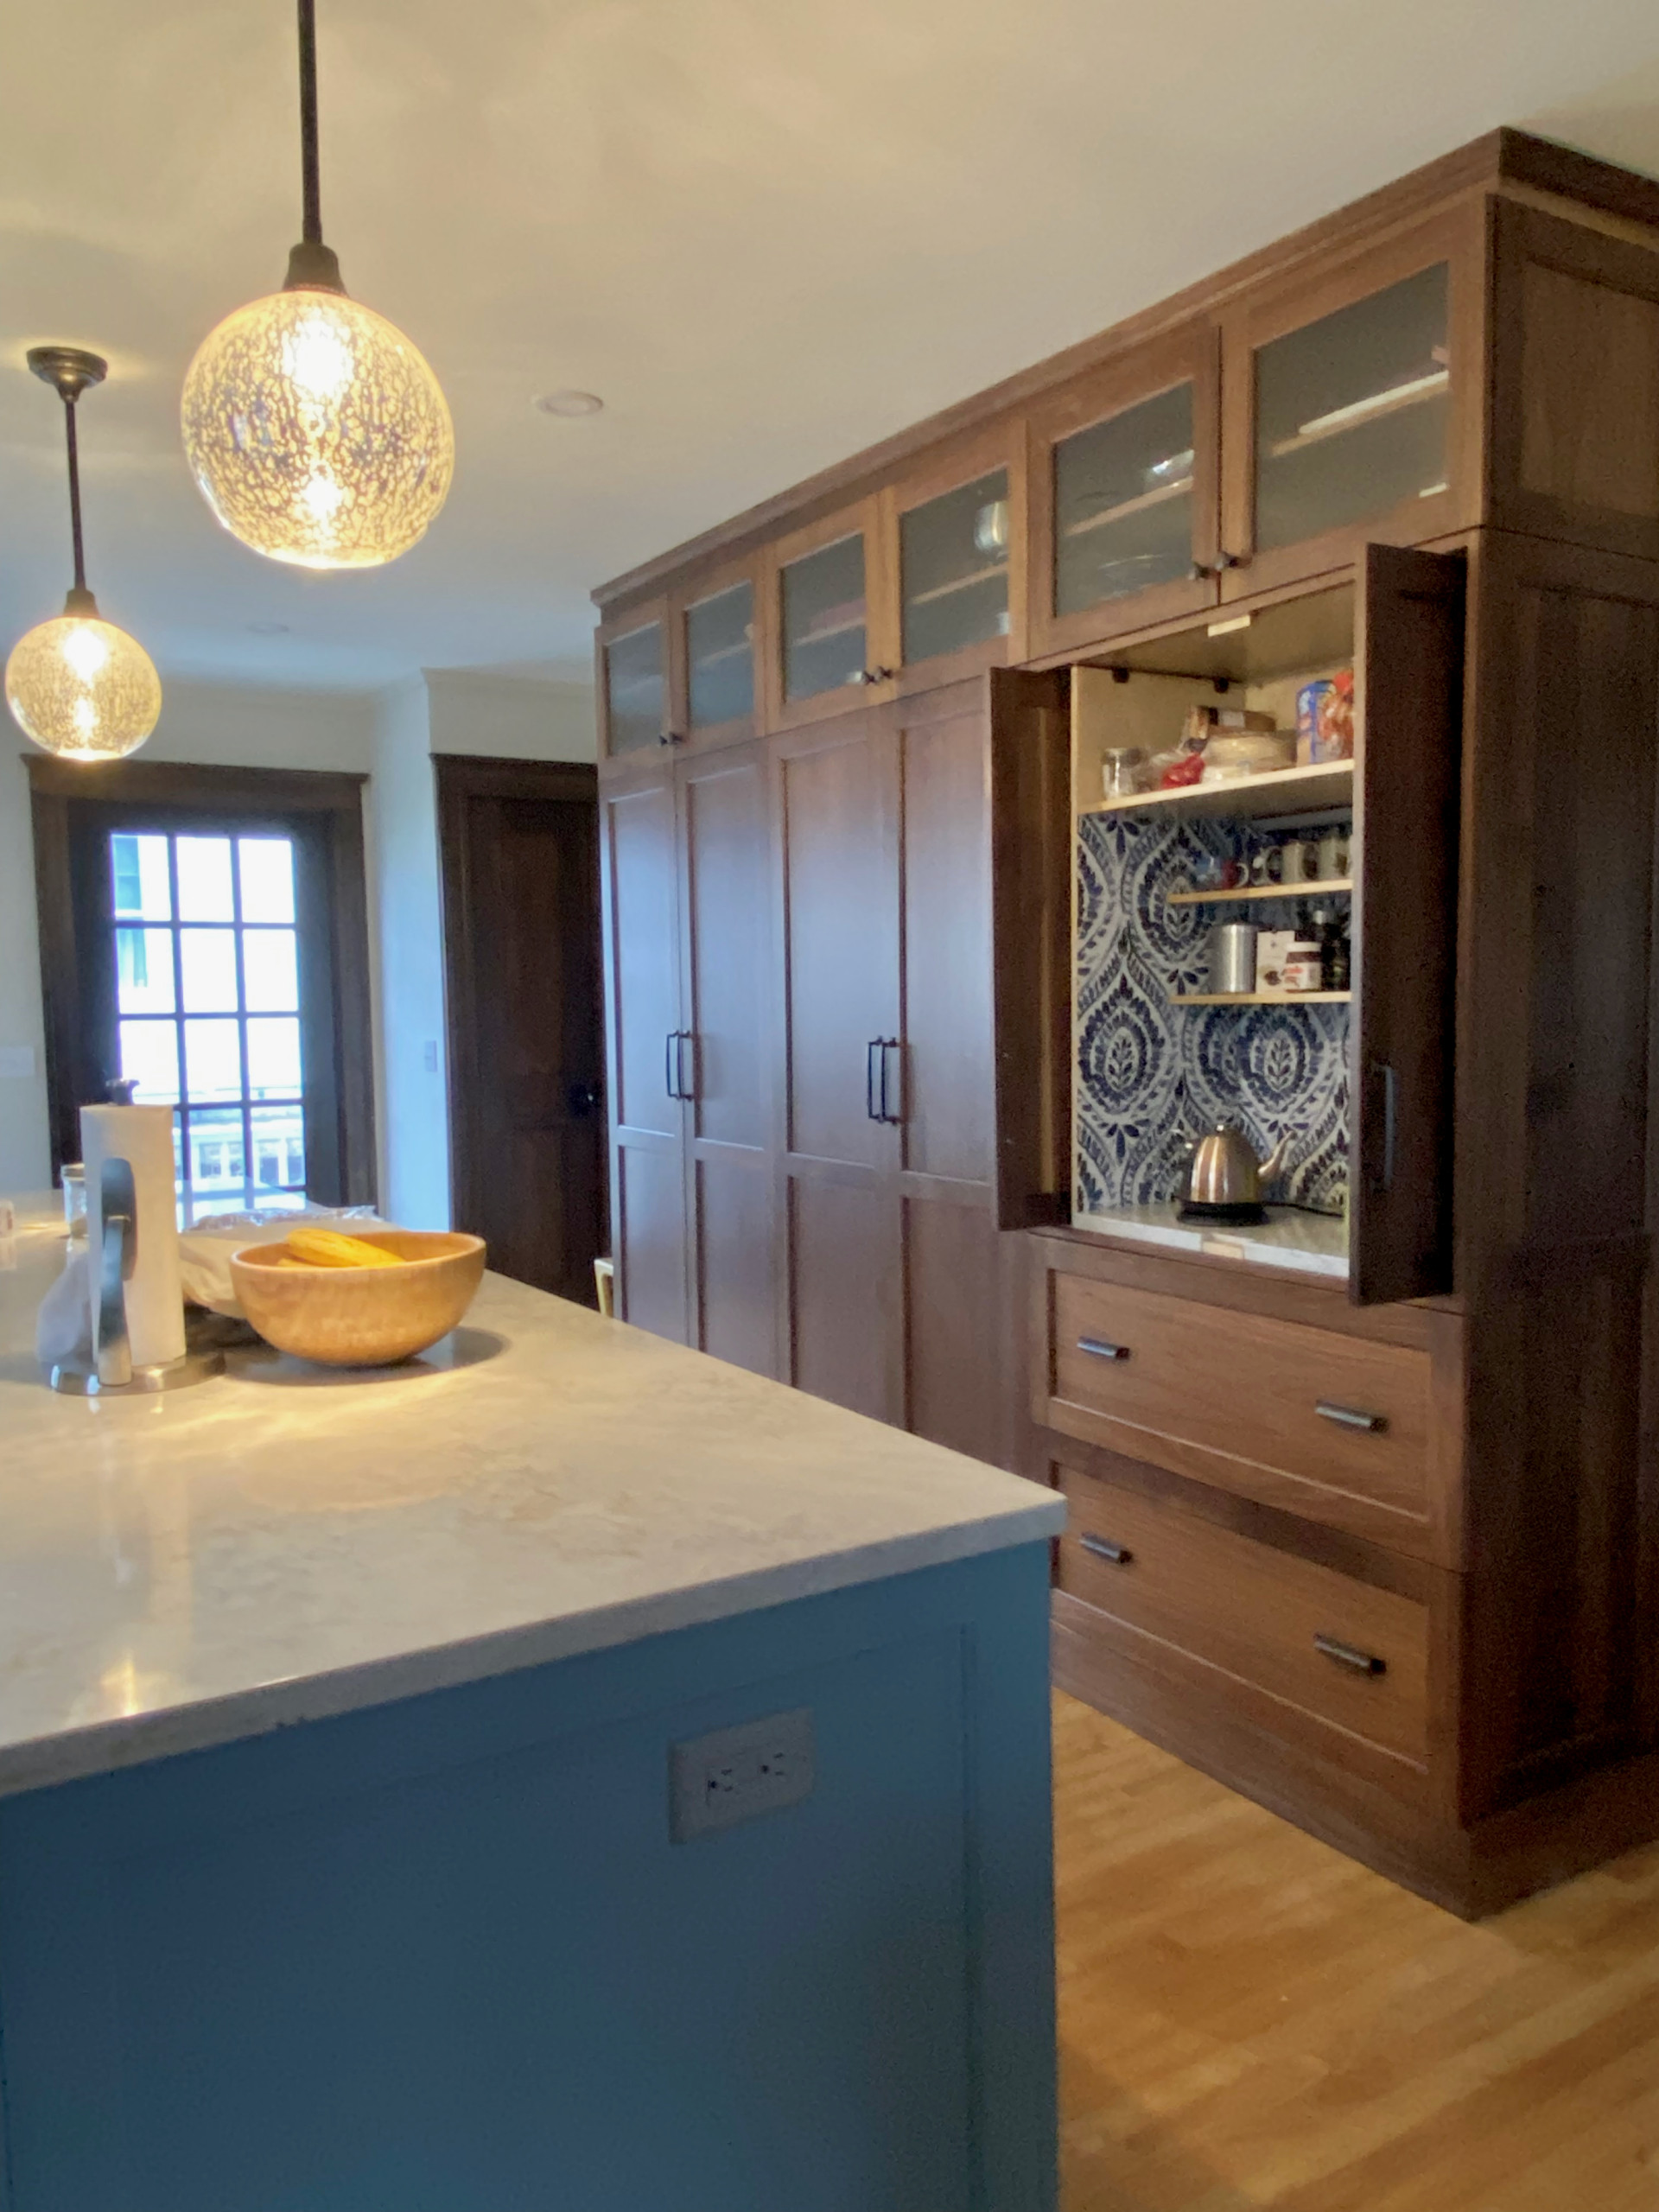 Walnut pantry cabinets recall the original Craftsman style of this 1920s home